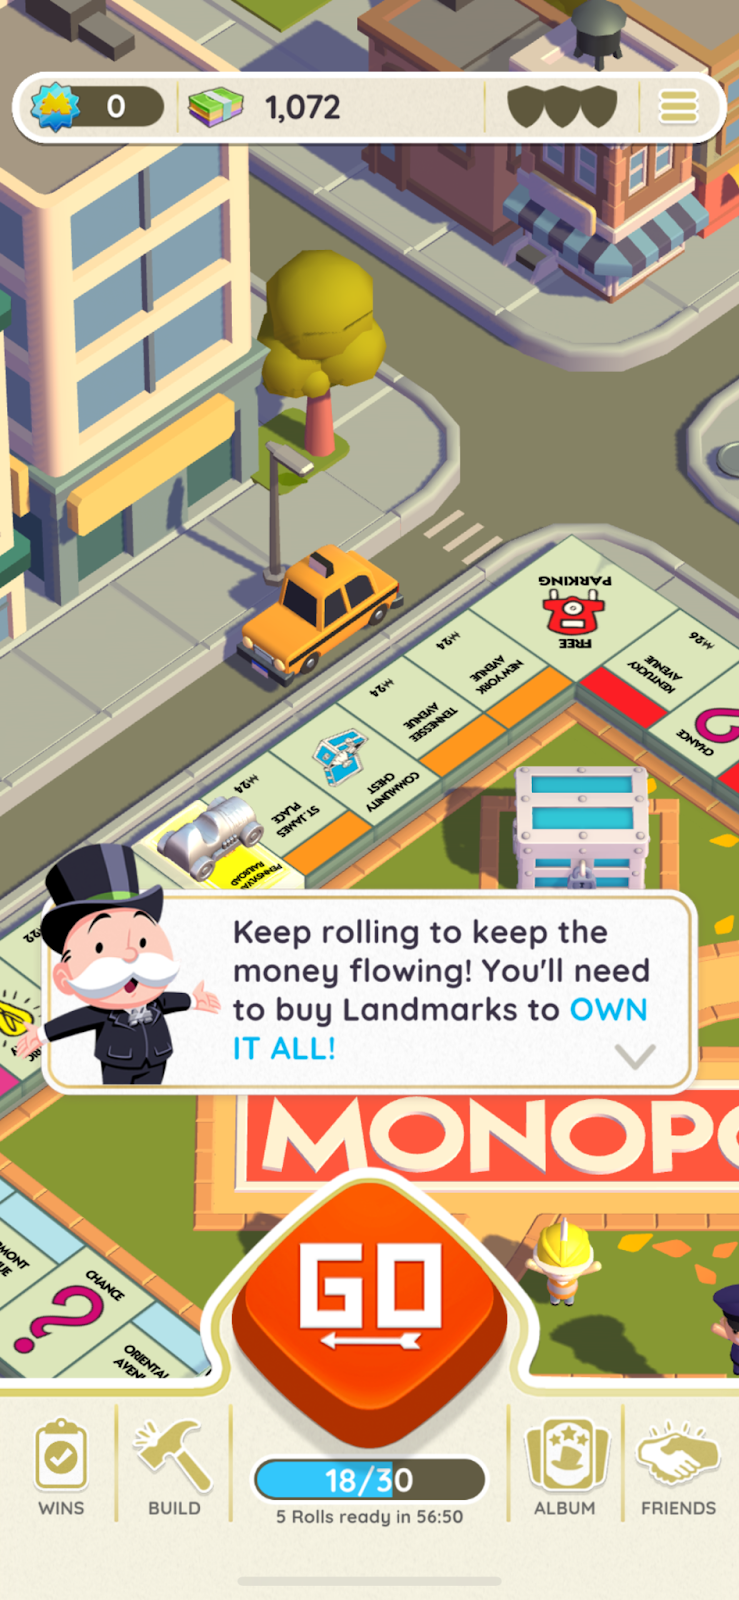 The features classic monopolyg gameplay mechanics with a lot of innovation